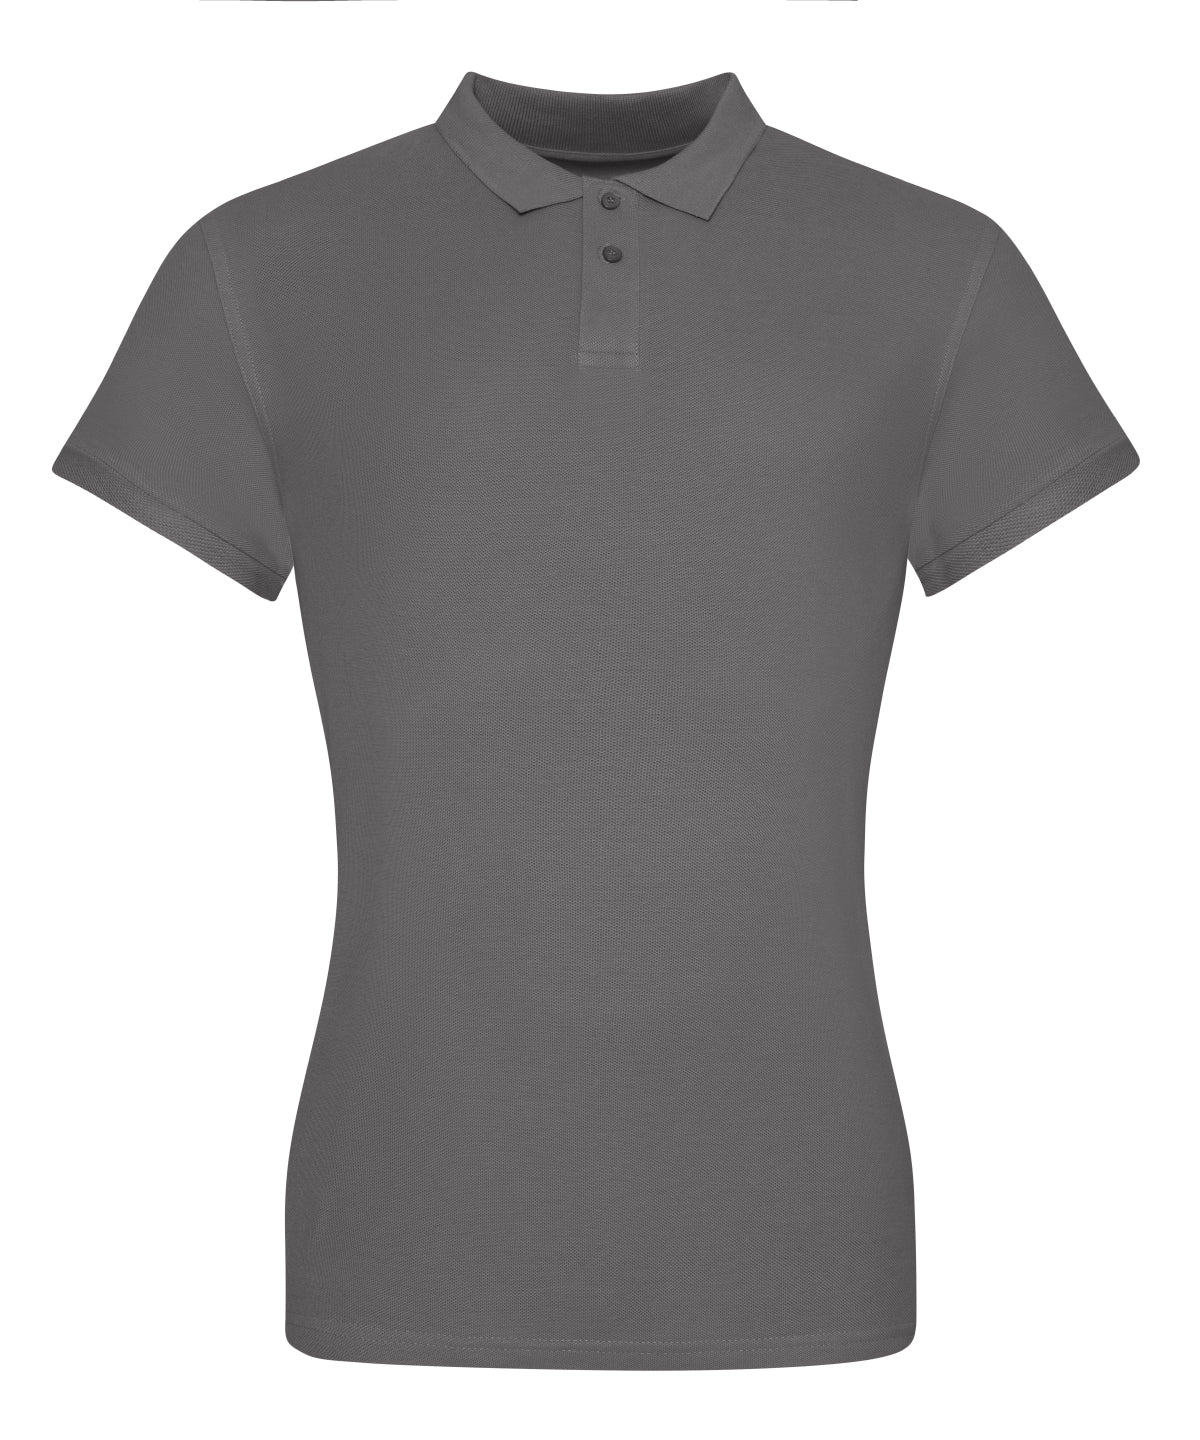 Personalised Polo Shirts - Burgundy AWDis Just Polo's The 100 women's polo